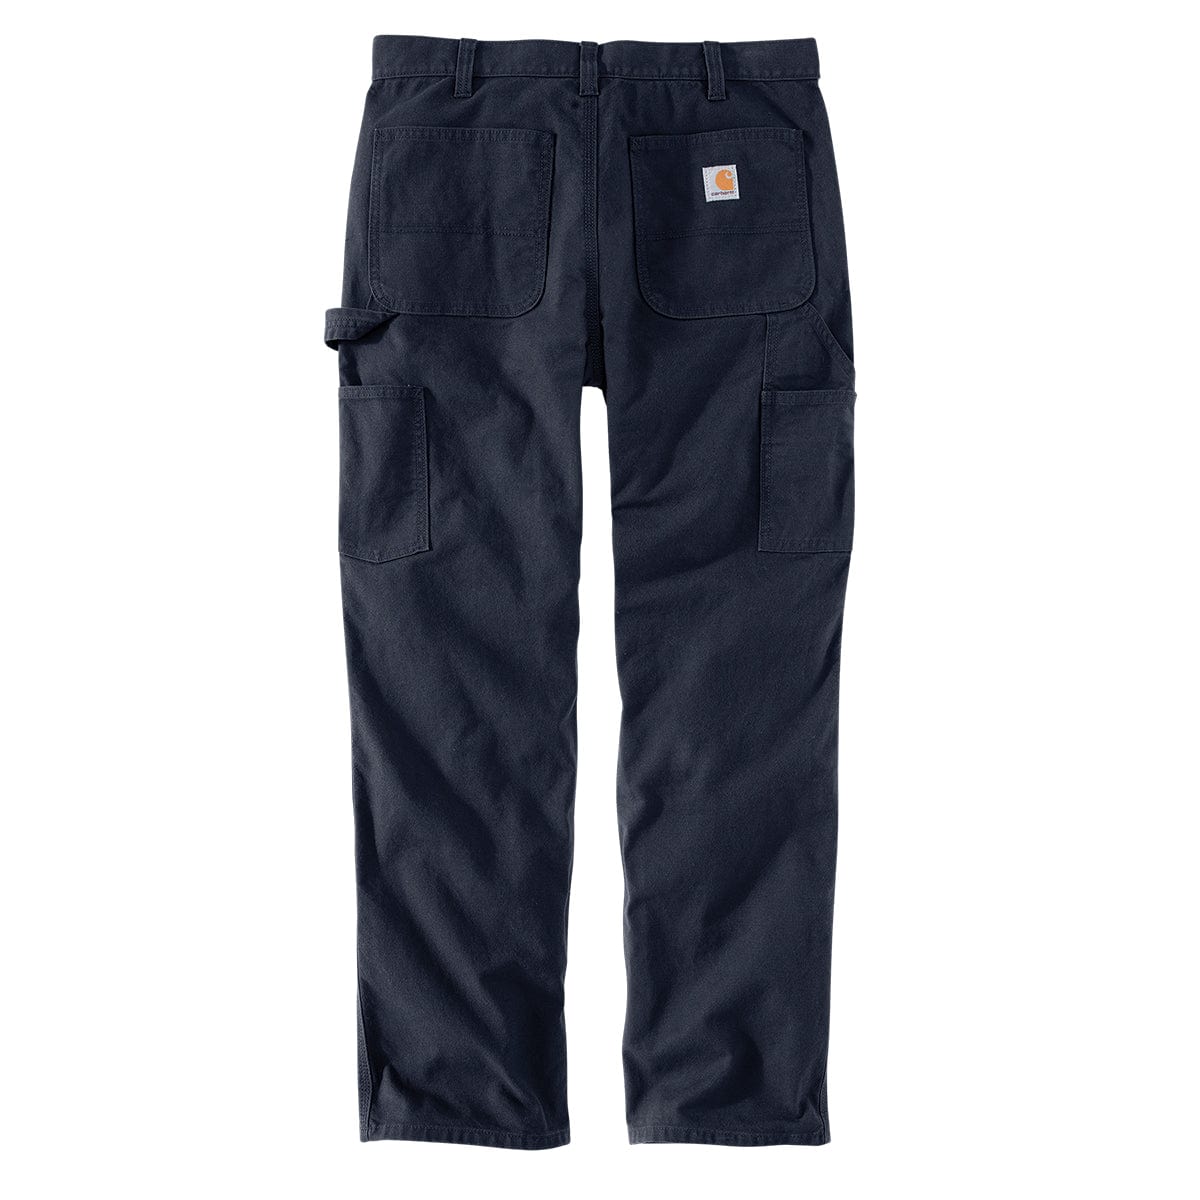 Carhartt Rugged Flex Relaxed Fit Pant, Gravel and Hickory